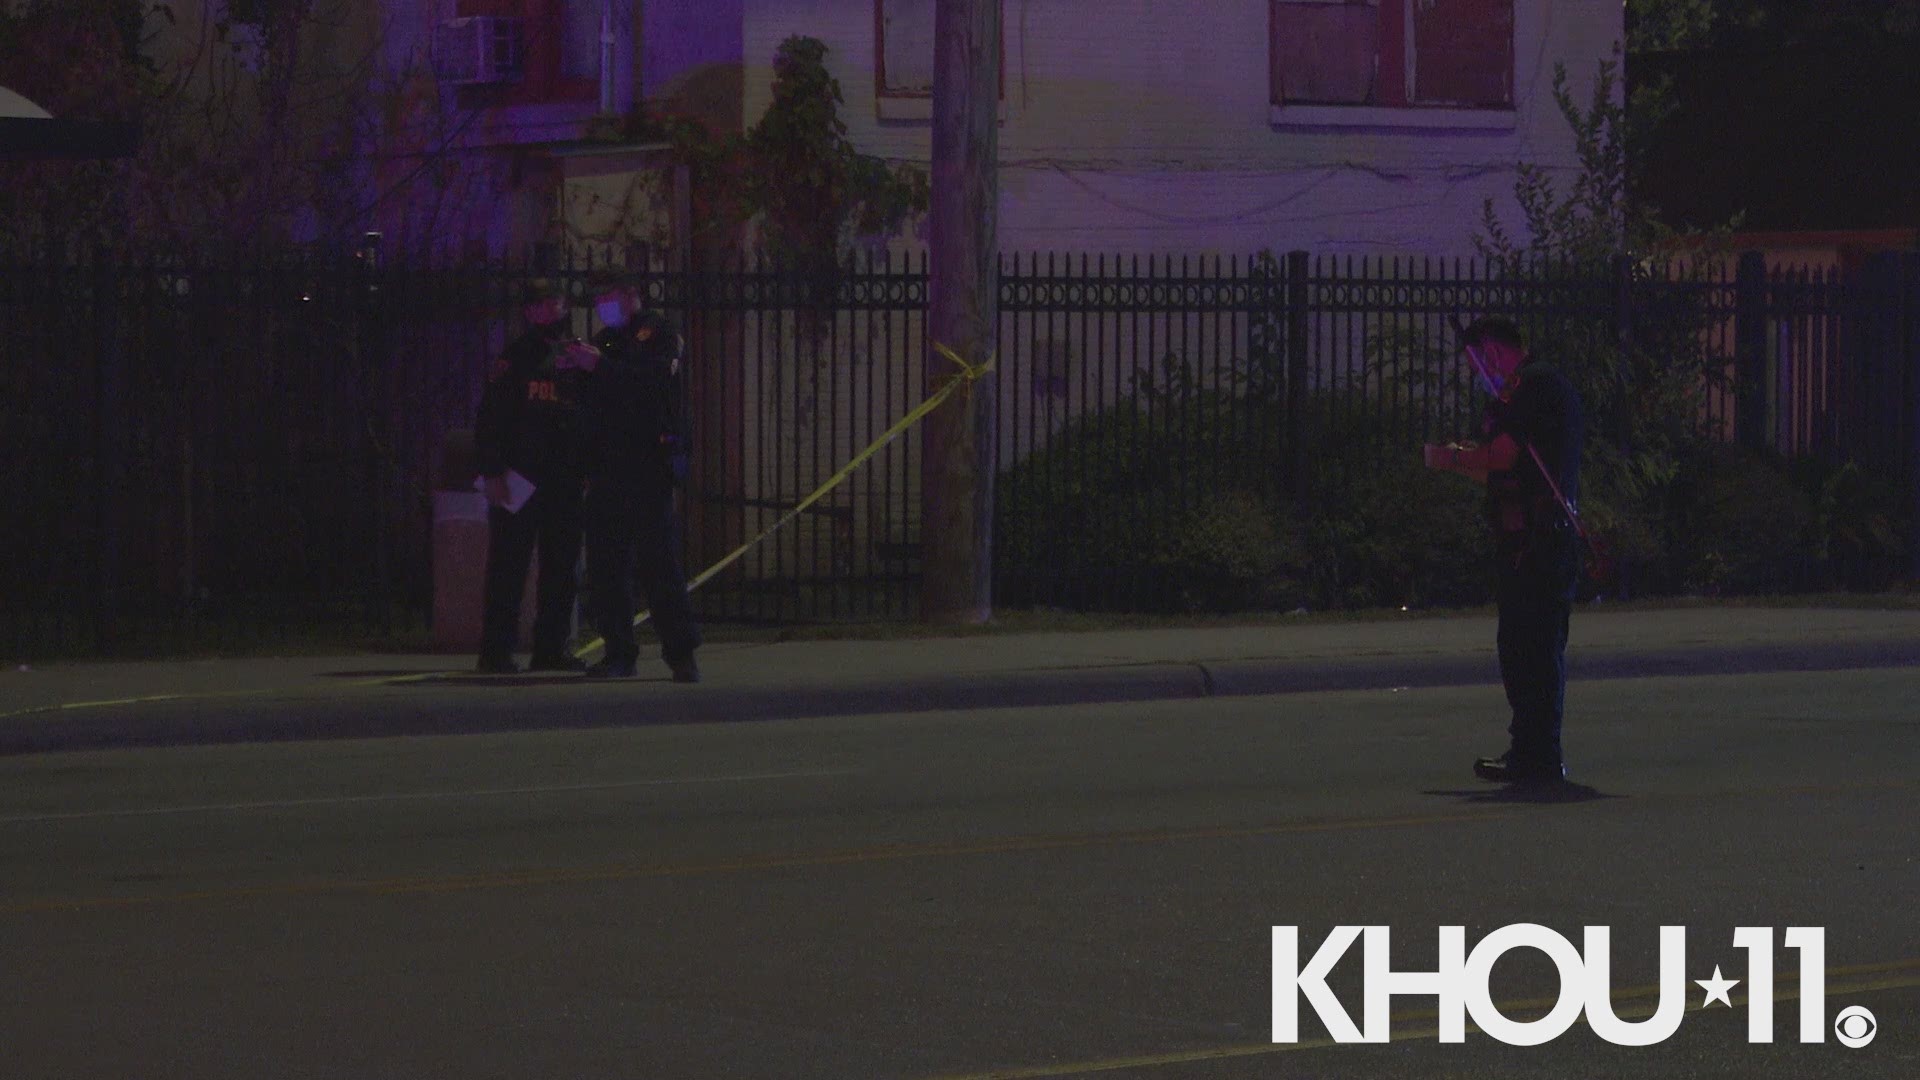 Houston Police are investigating after one man was killed in a hit-and-run Wednesday night on Houston’s northside.